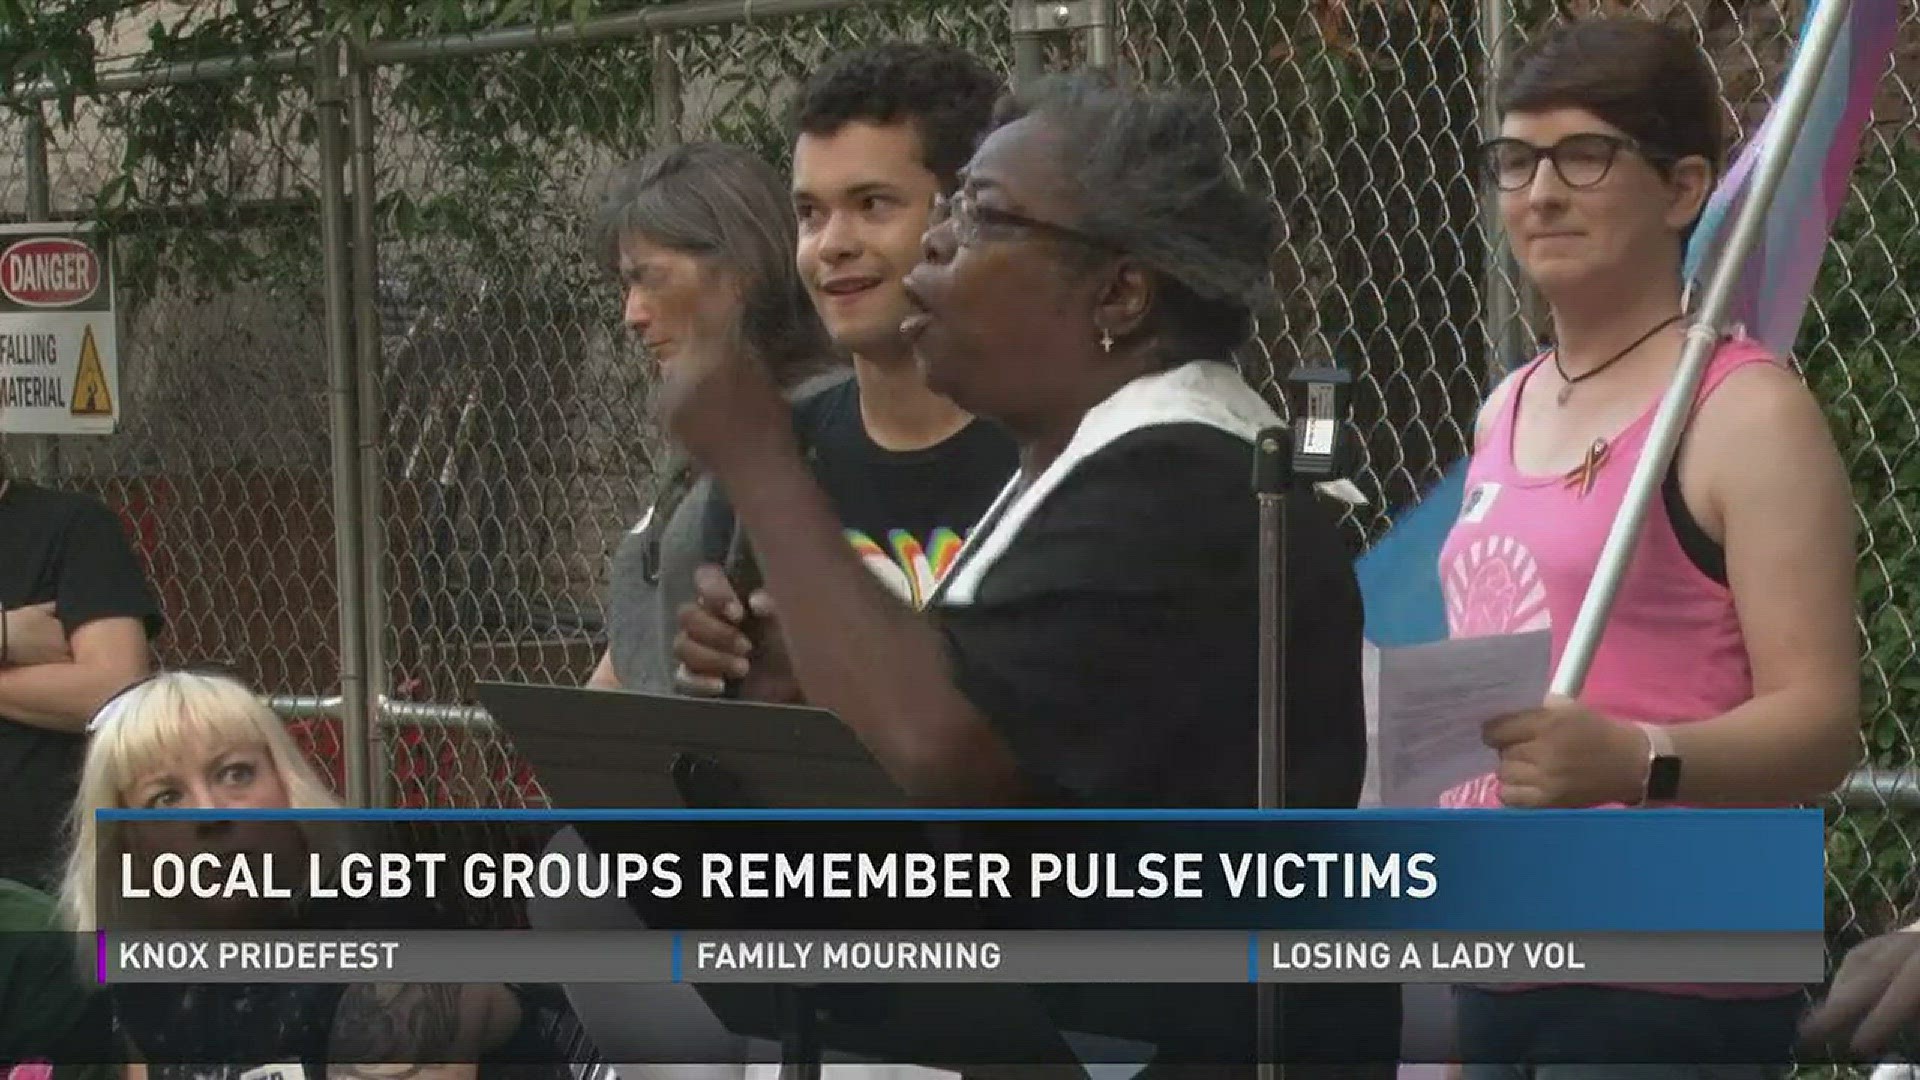 June 12, 2017: Community members gathered in Knoxville's Krutch Park to honor the lives of the Pulse nightclub shooting victims one year later.